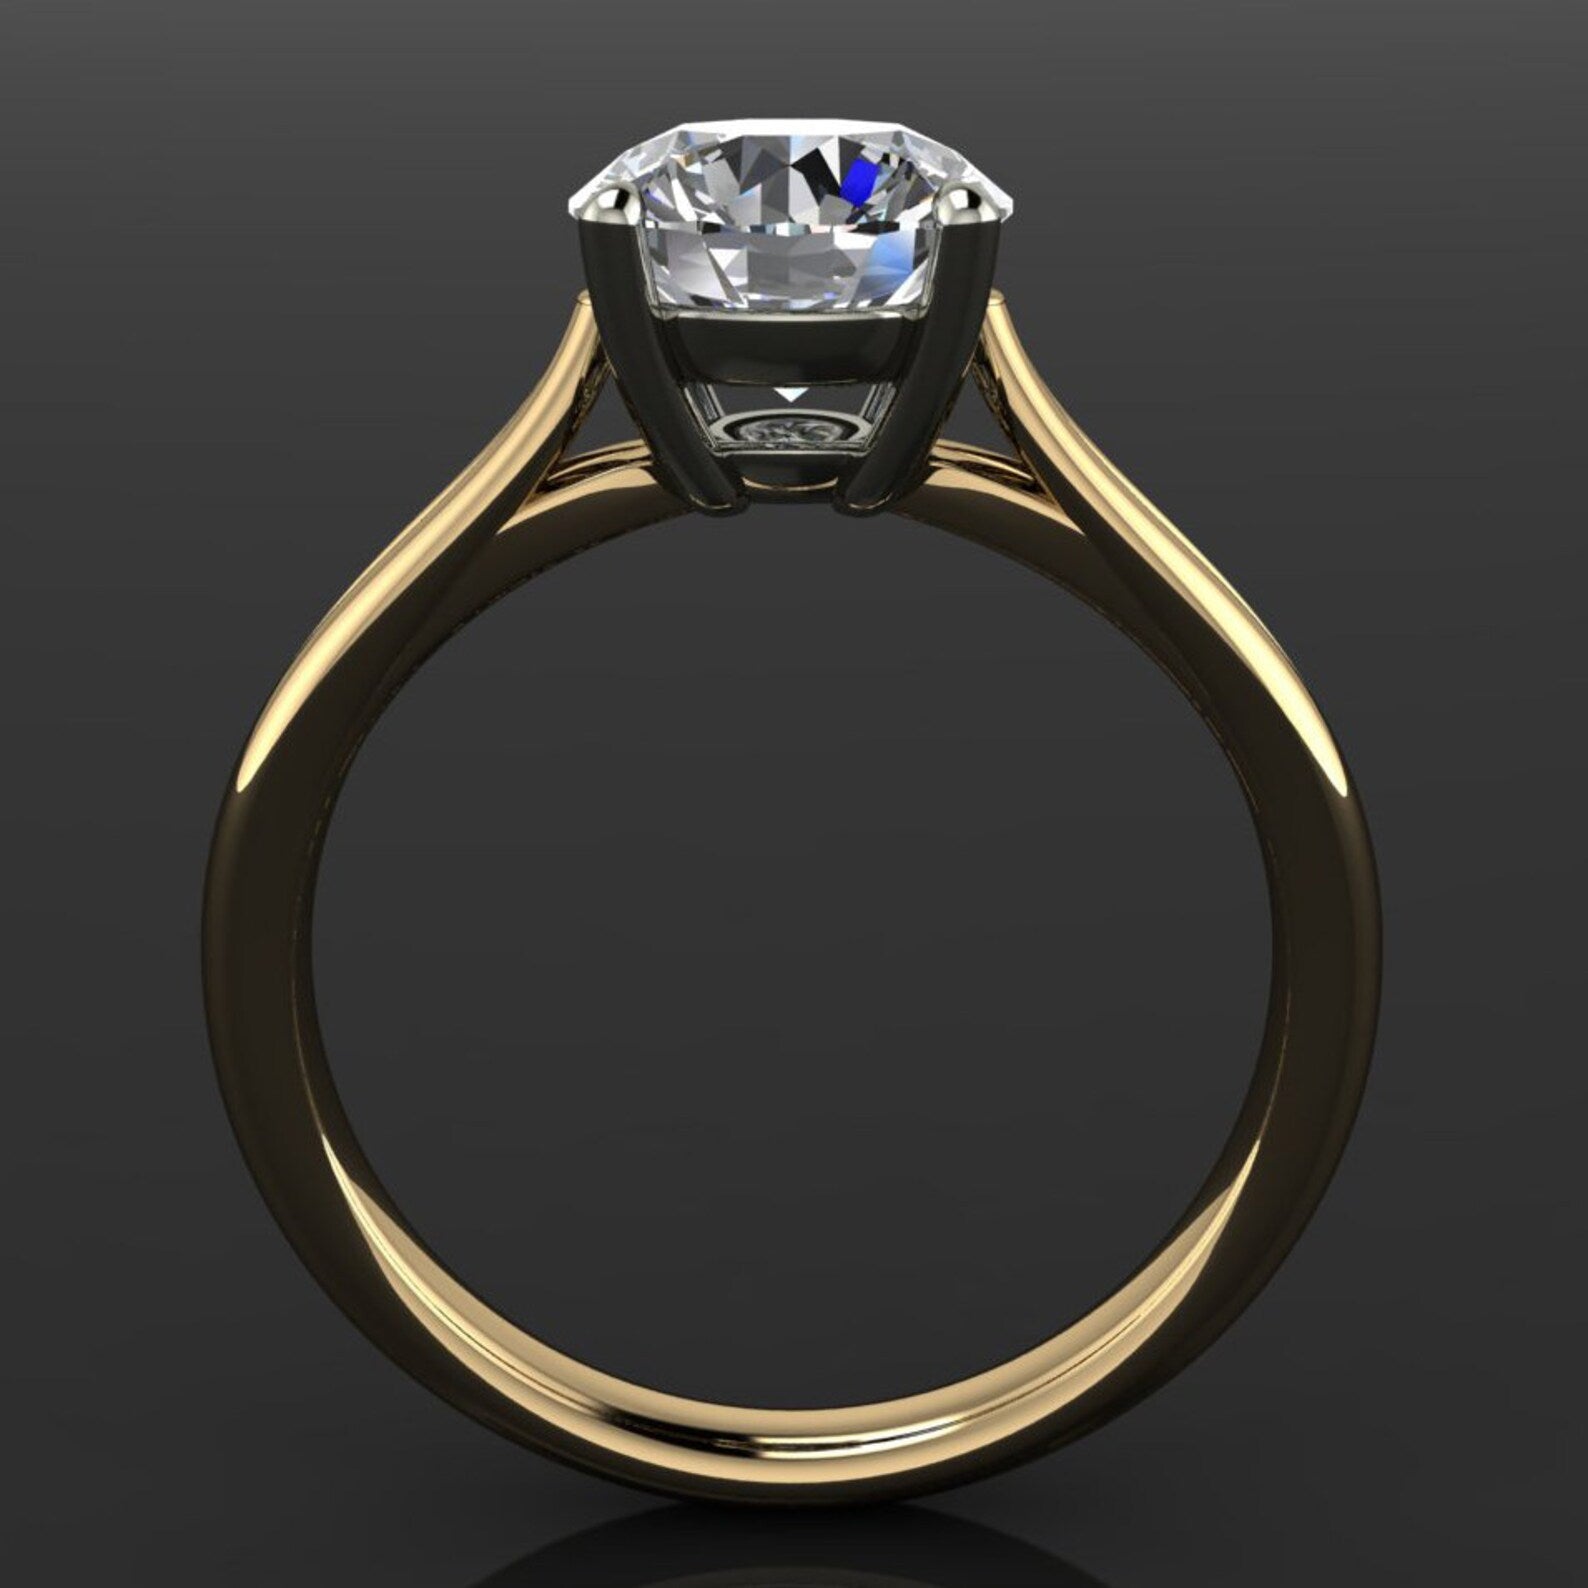 victoria ring - 1.5 carat diamond cut round NEO moissanite engagement ring, two tone ring - J Hollywood Designs